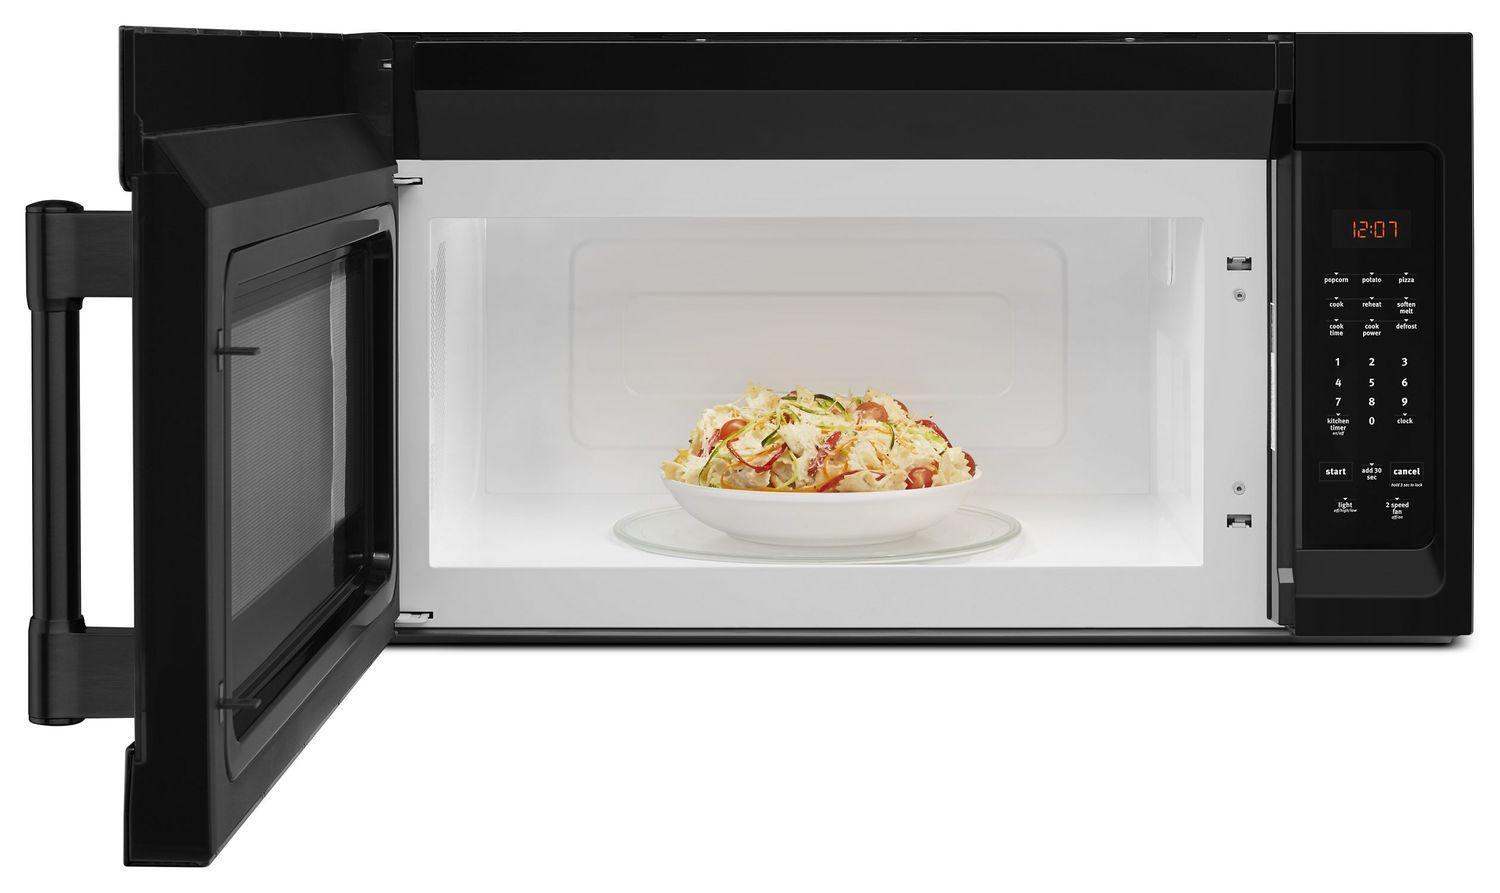 Maytag Compact Over-The-Range Microwave - 1.7 Cu. Ft. Black